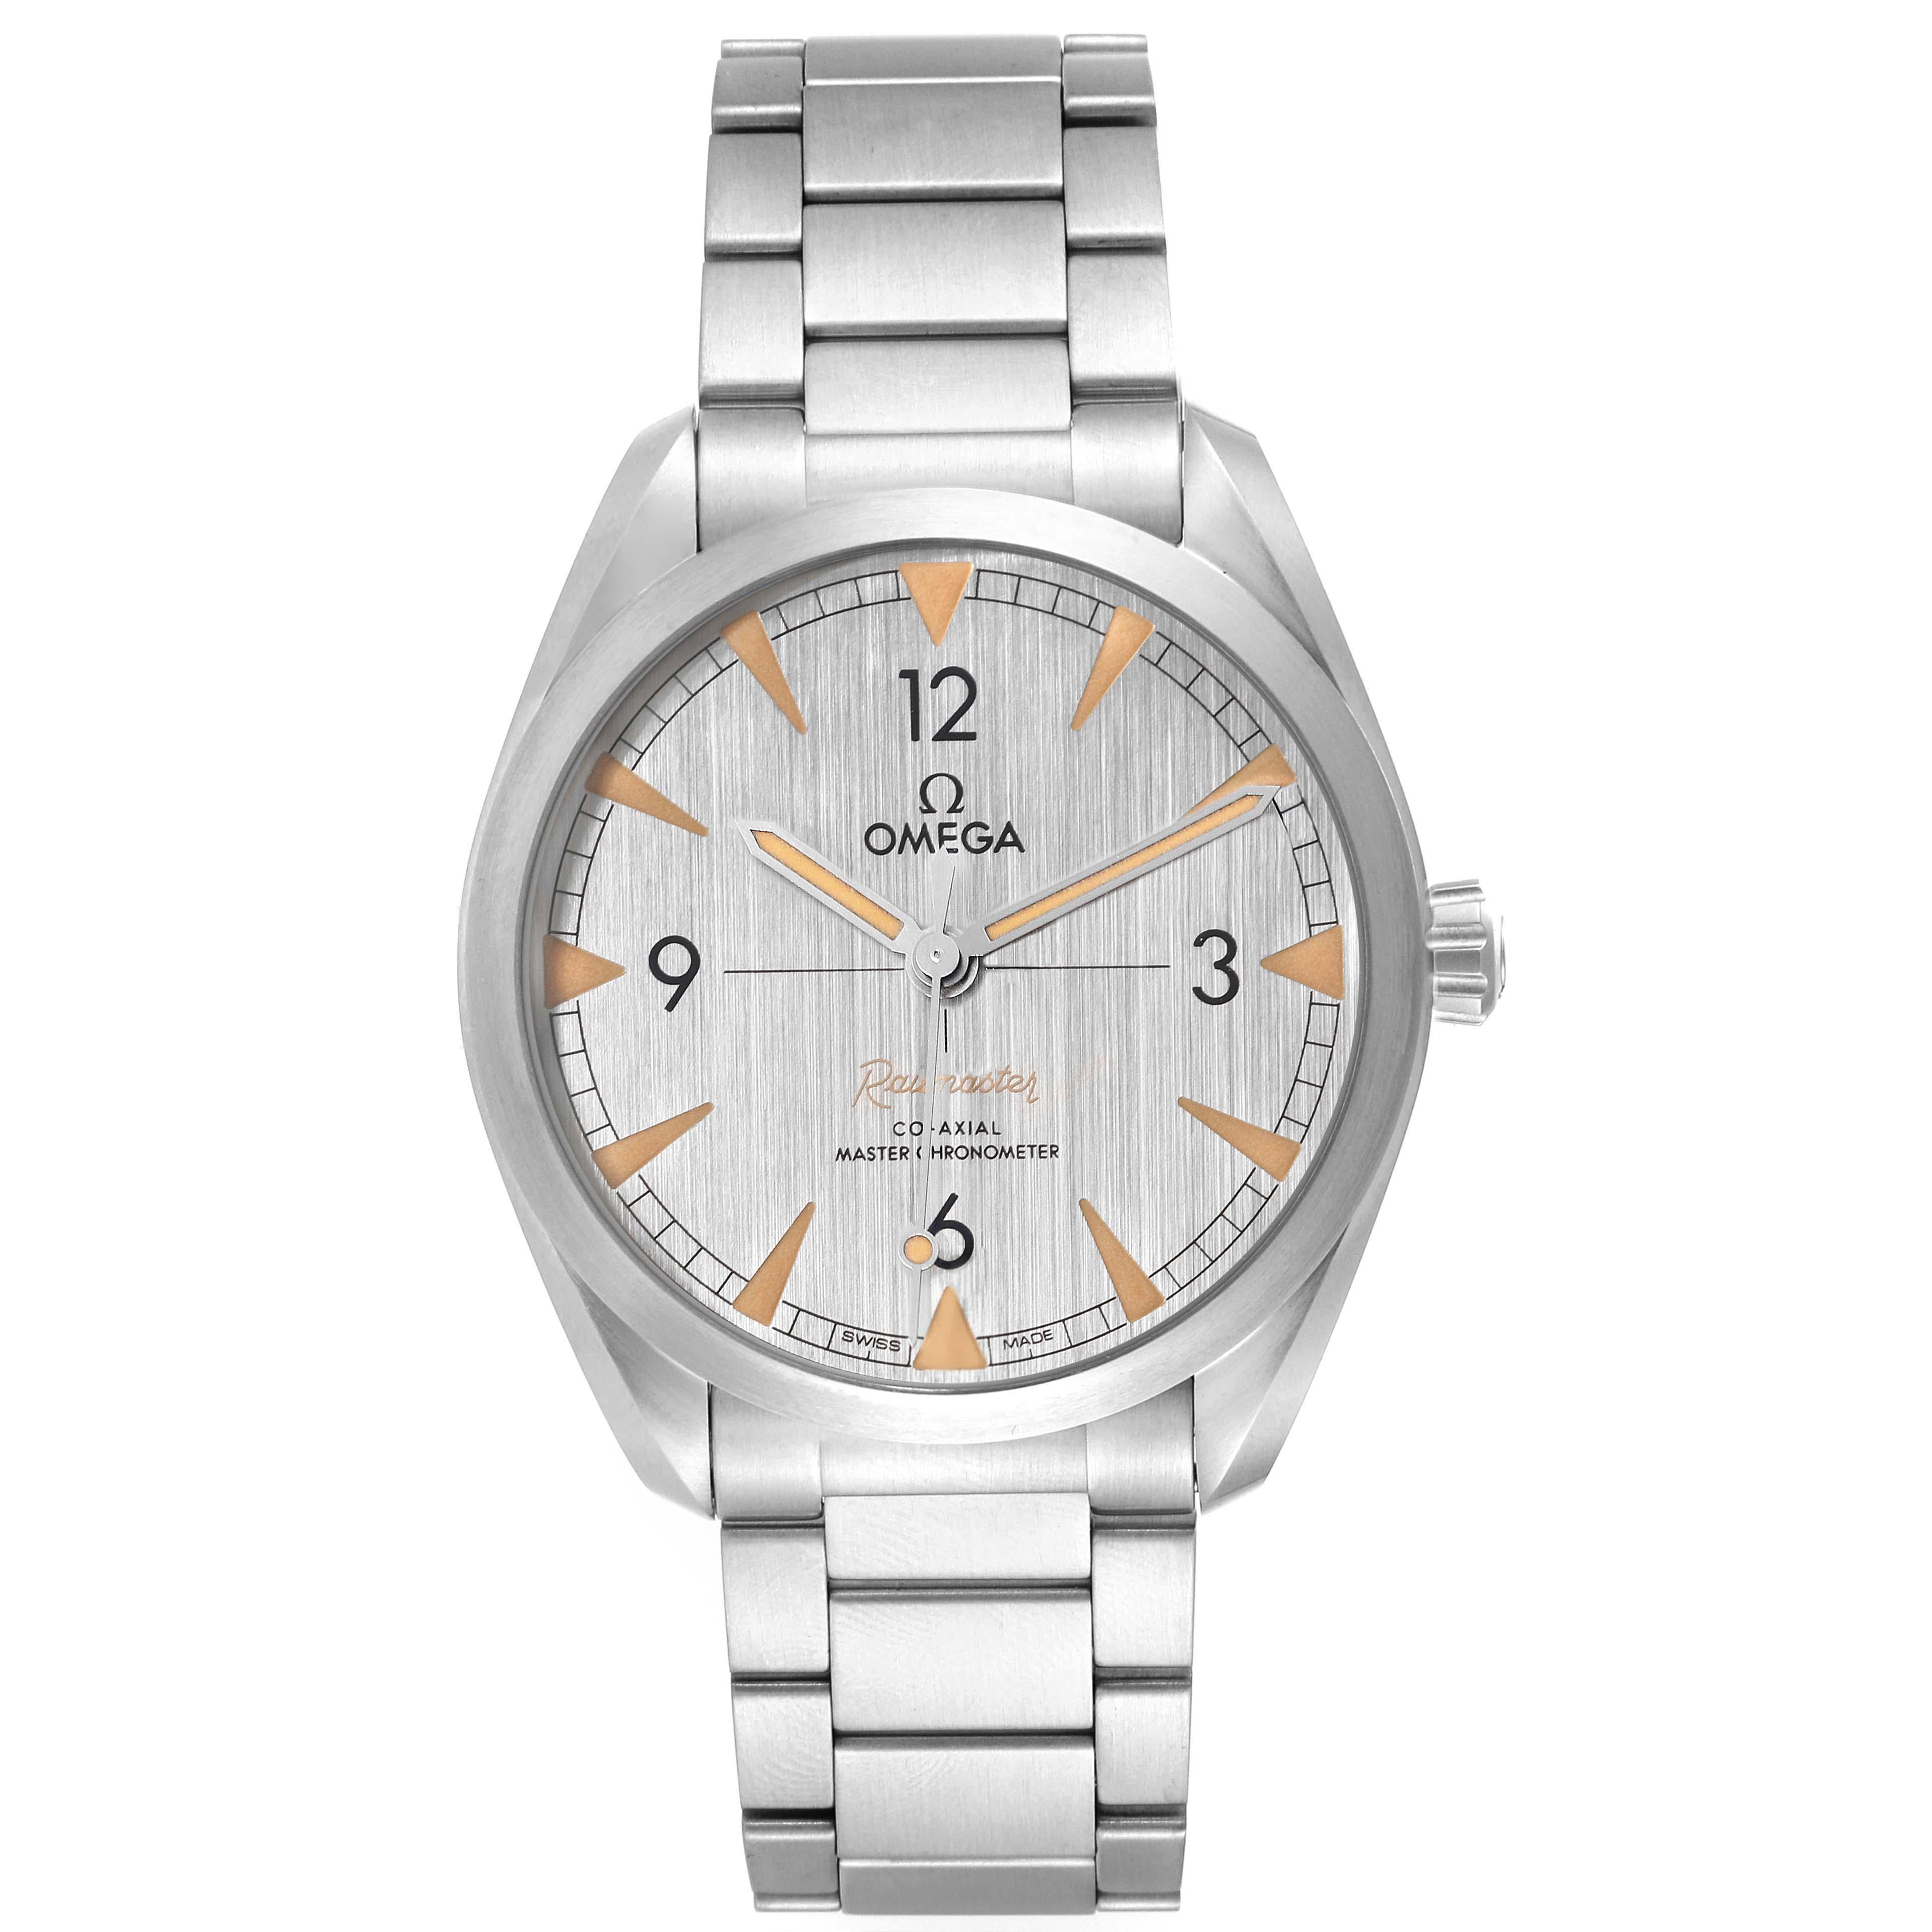 Omega Railmaster Chronometer Steel Mens Watch 220.10.40.20.06.001 Unworn. Omega calibre 8806 automatic self-winding movement with Co-Axial escapement. Certified Master Chronometer, approved by METAS, resistant to magnetic fields reaching 15,000